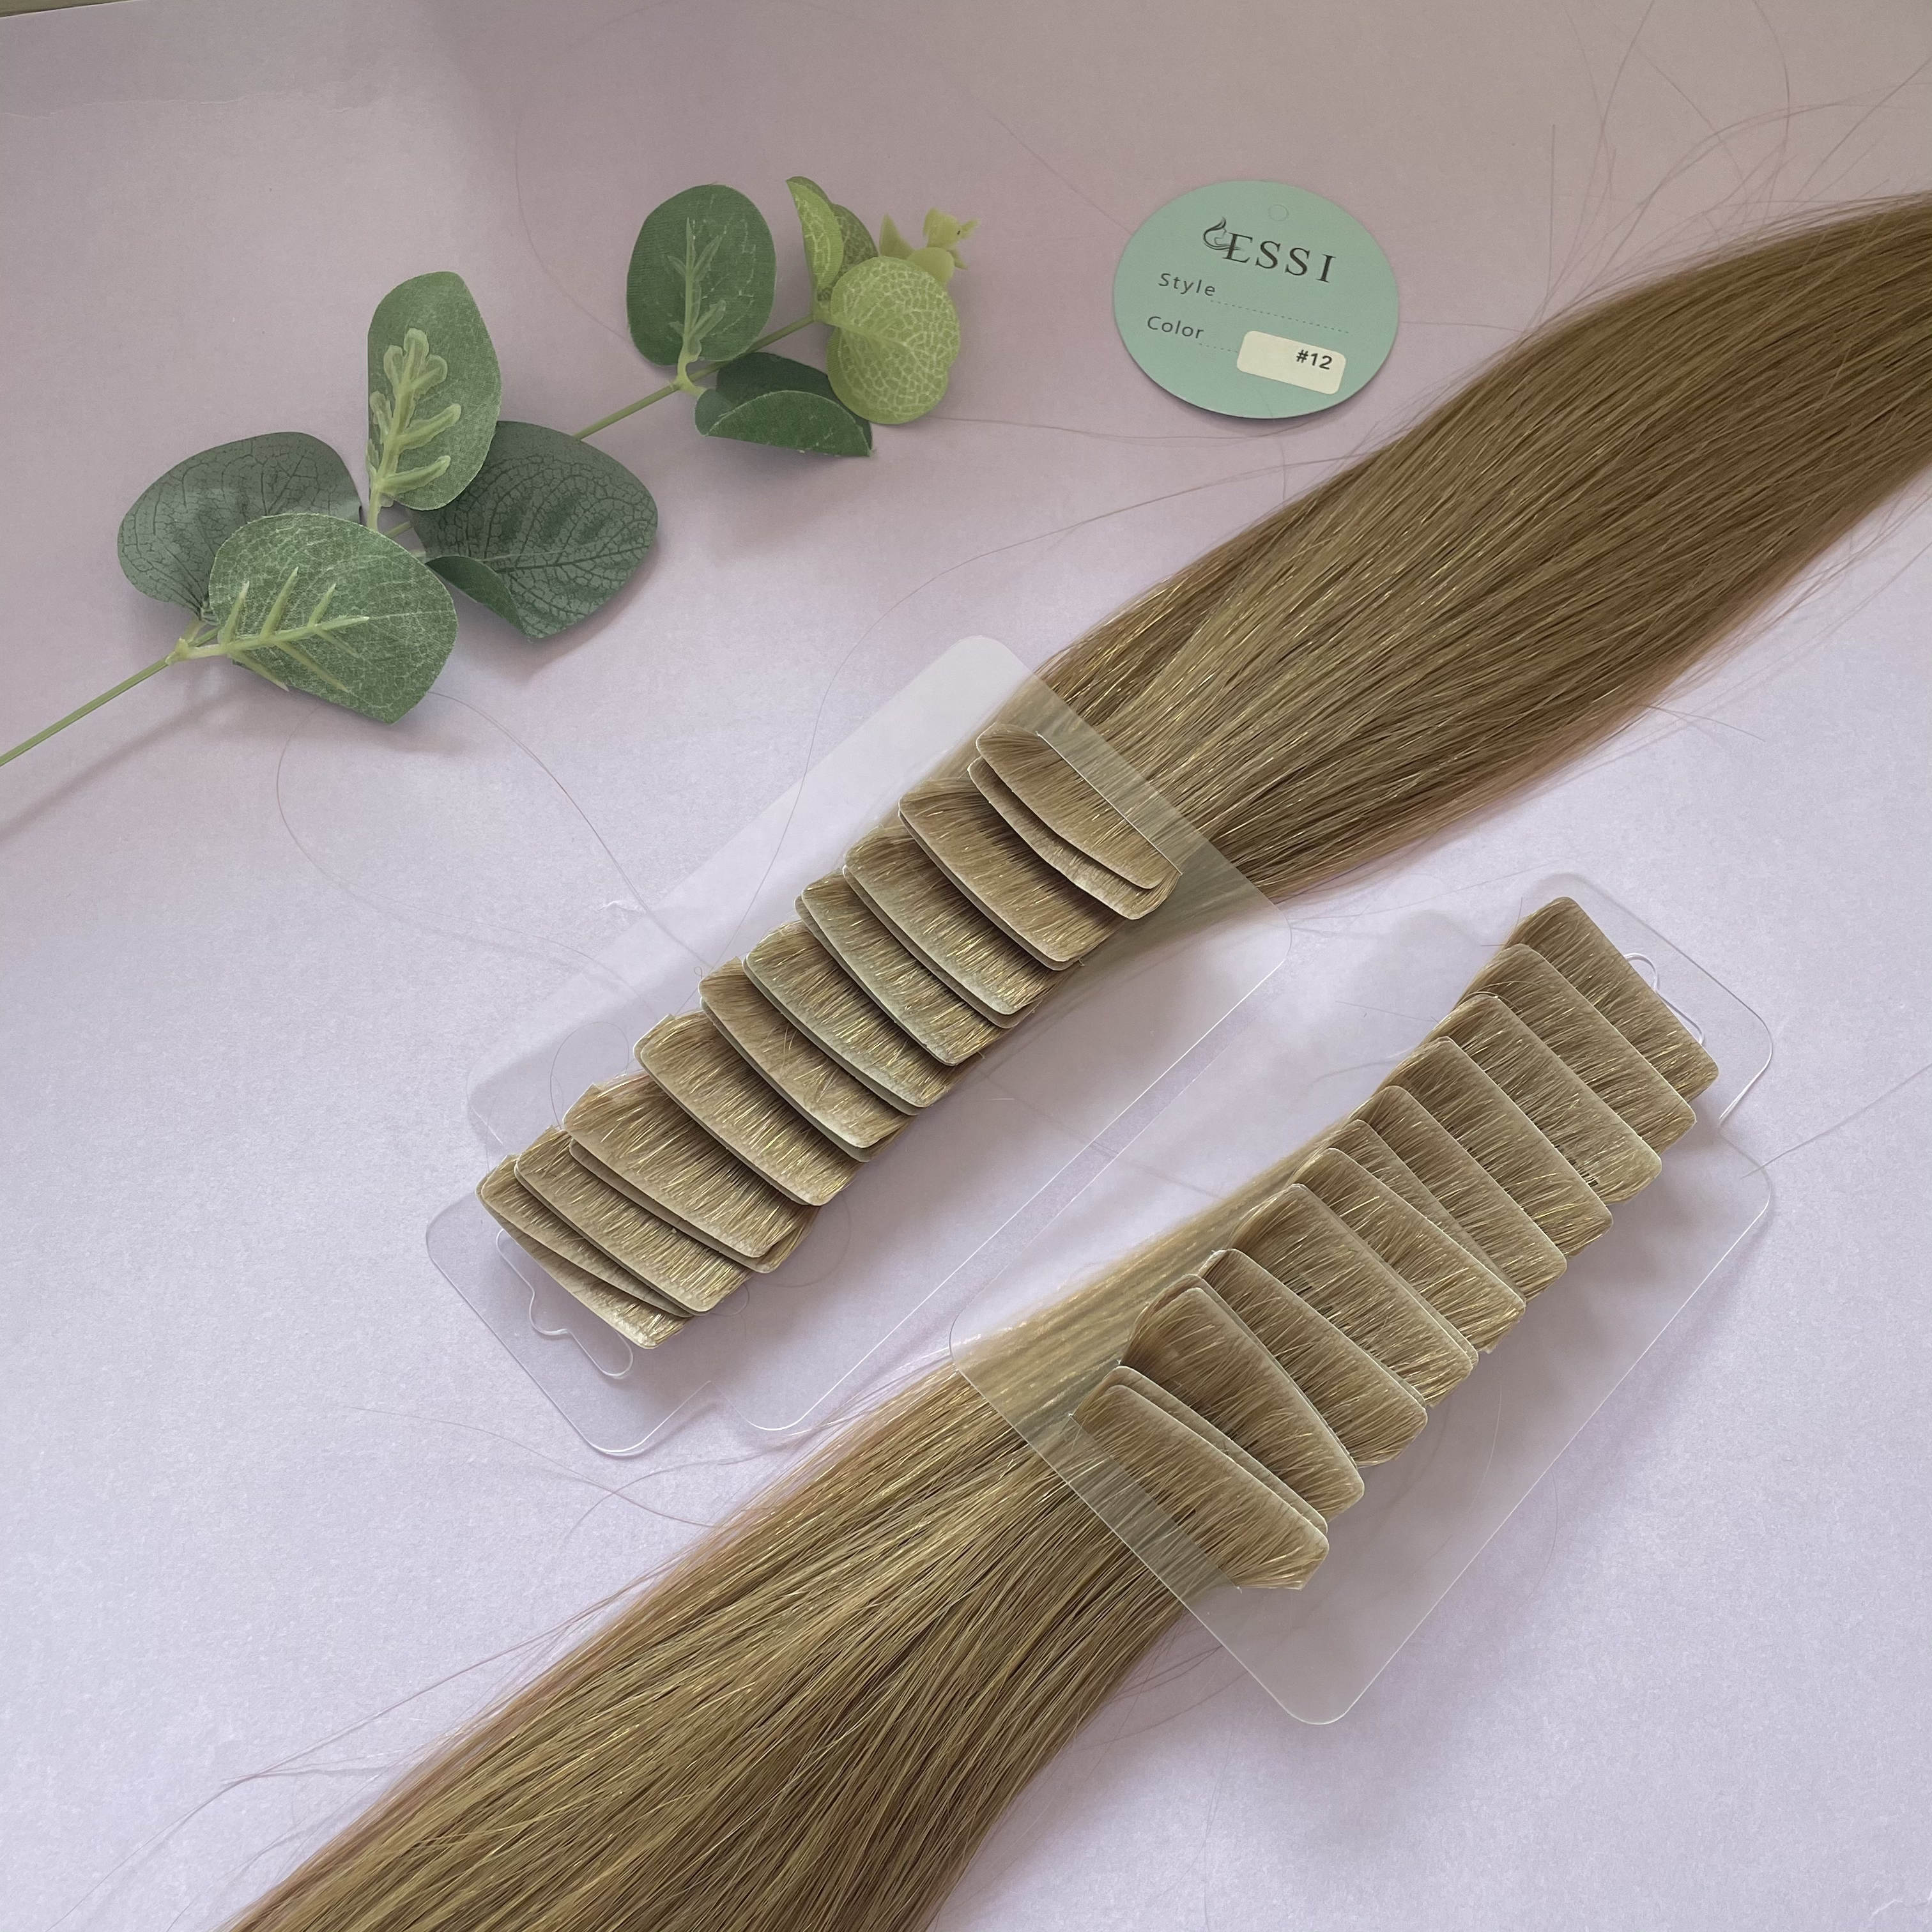 Injected Skin Weft Adhesive Tape Human Hair Extension Double Drawn Invisible Color 7 Export to Europe